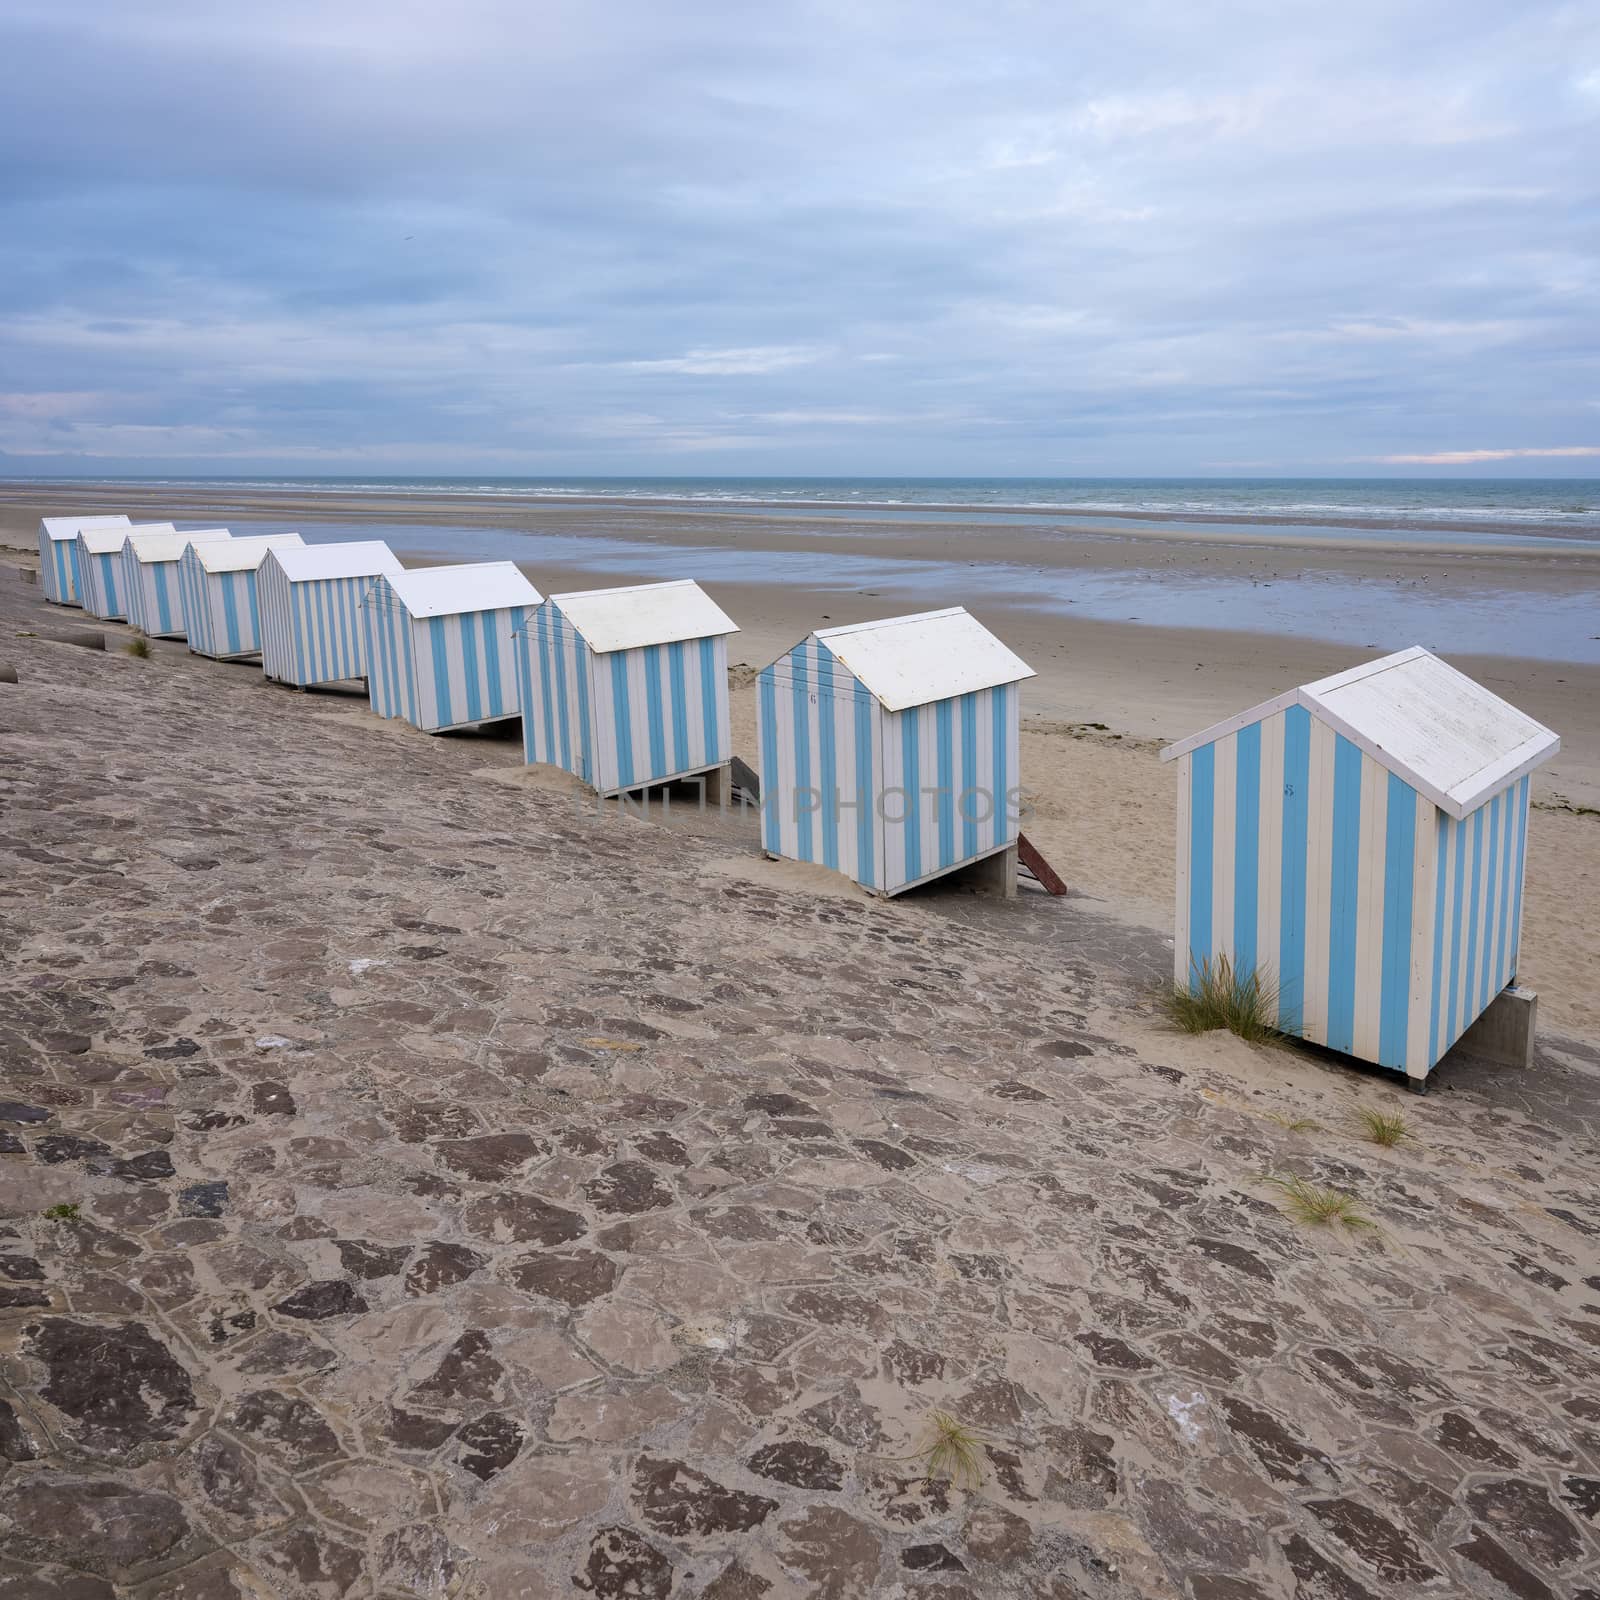 small striped beach huts in hardelot plage on the coast of normandy by ahavelaar